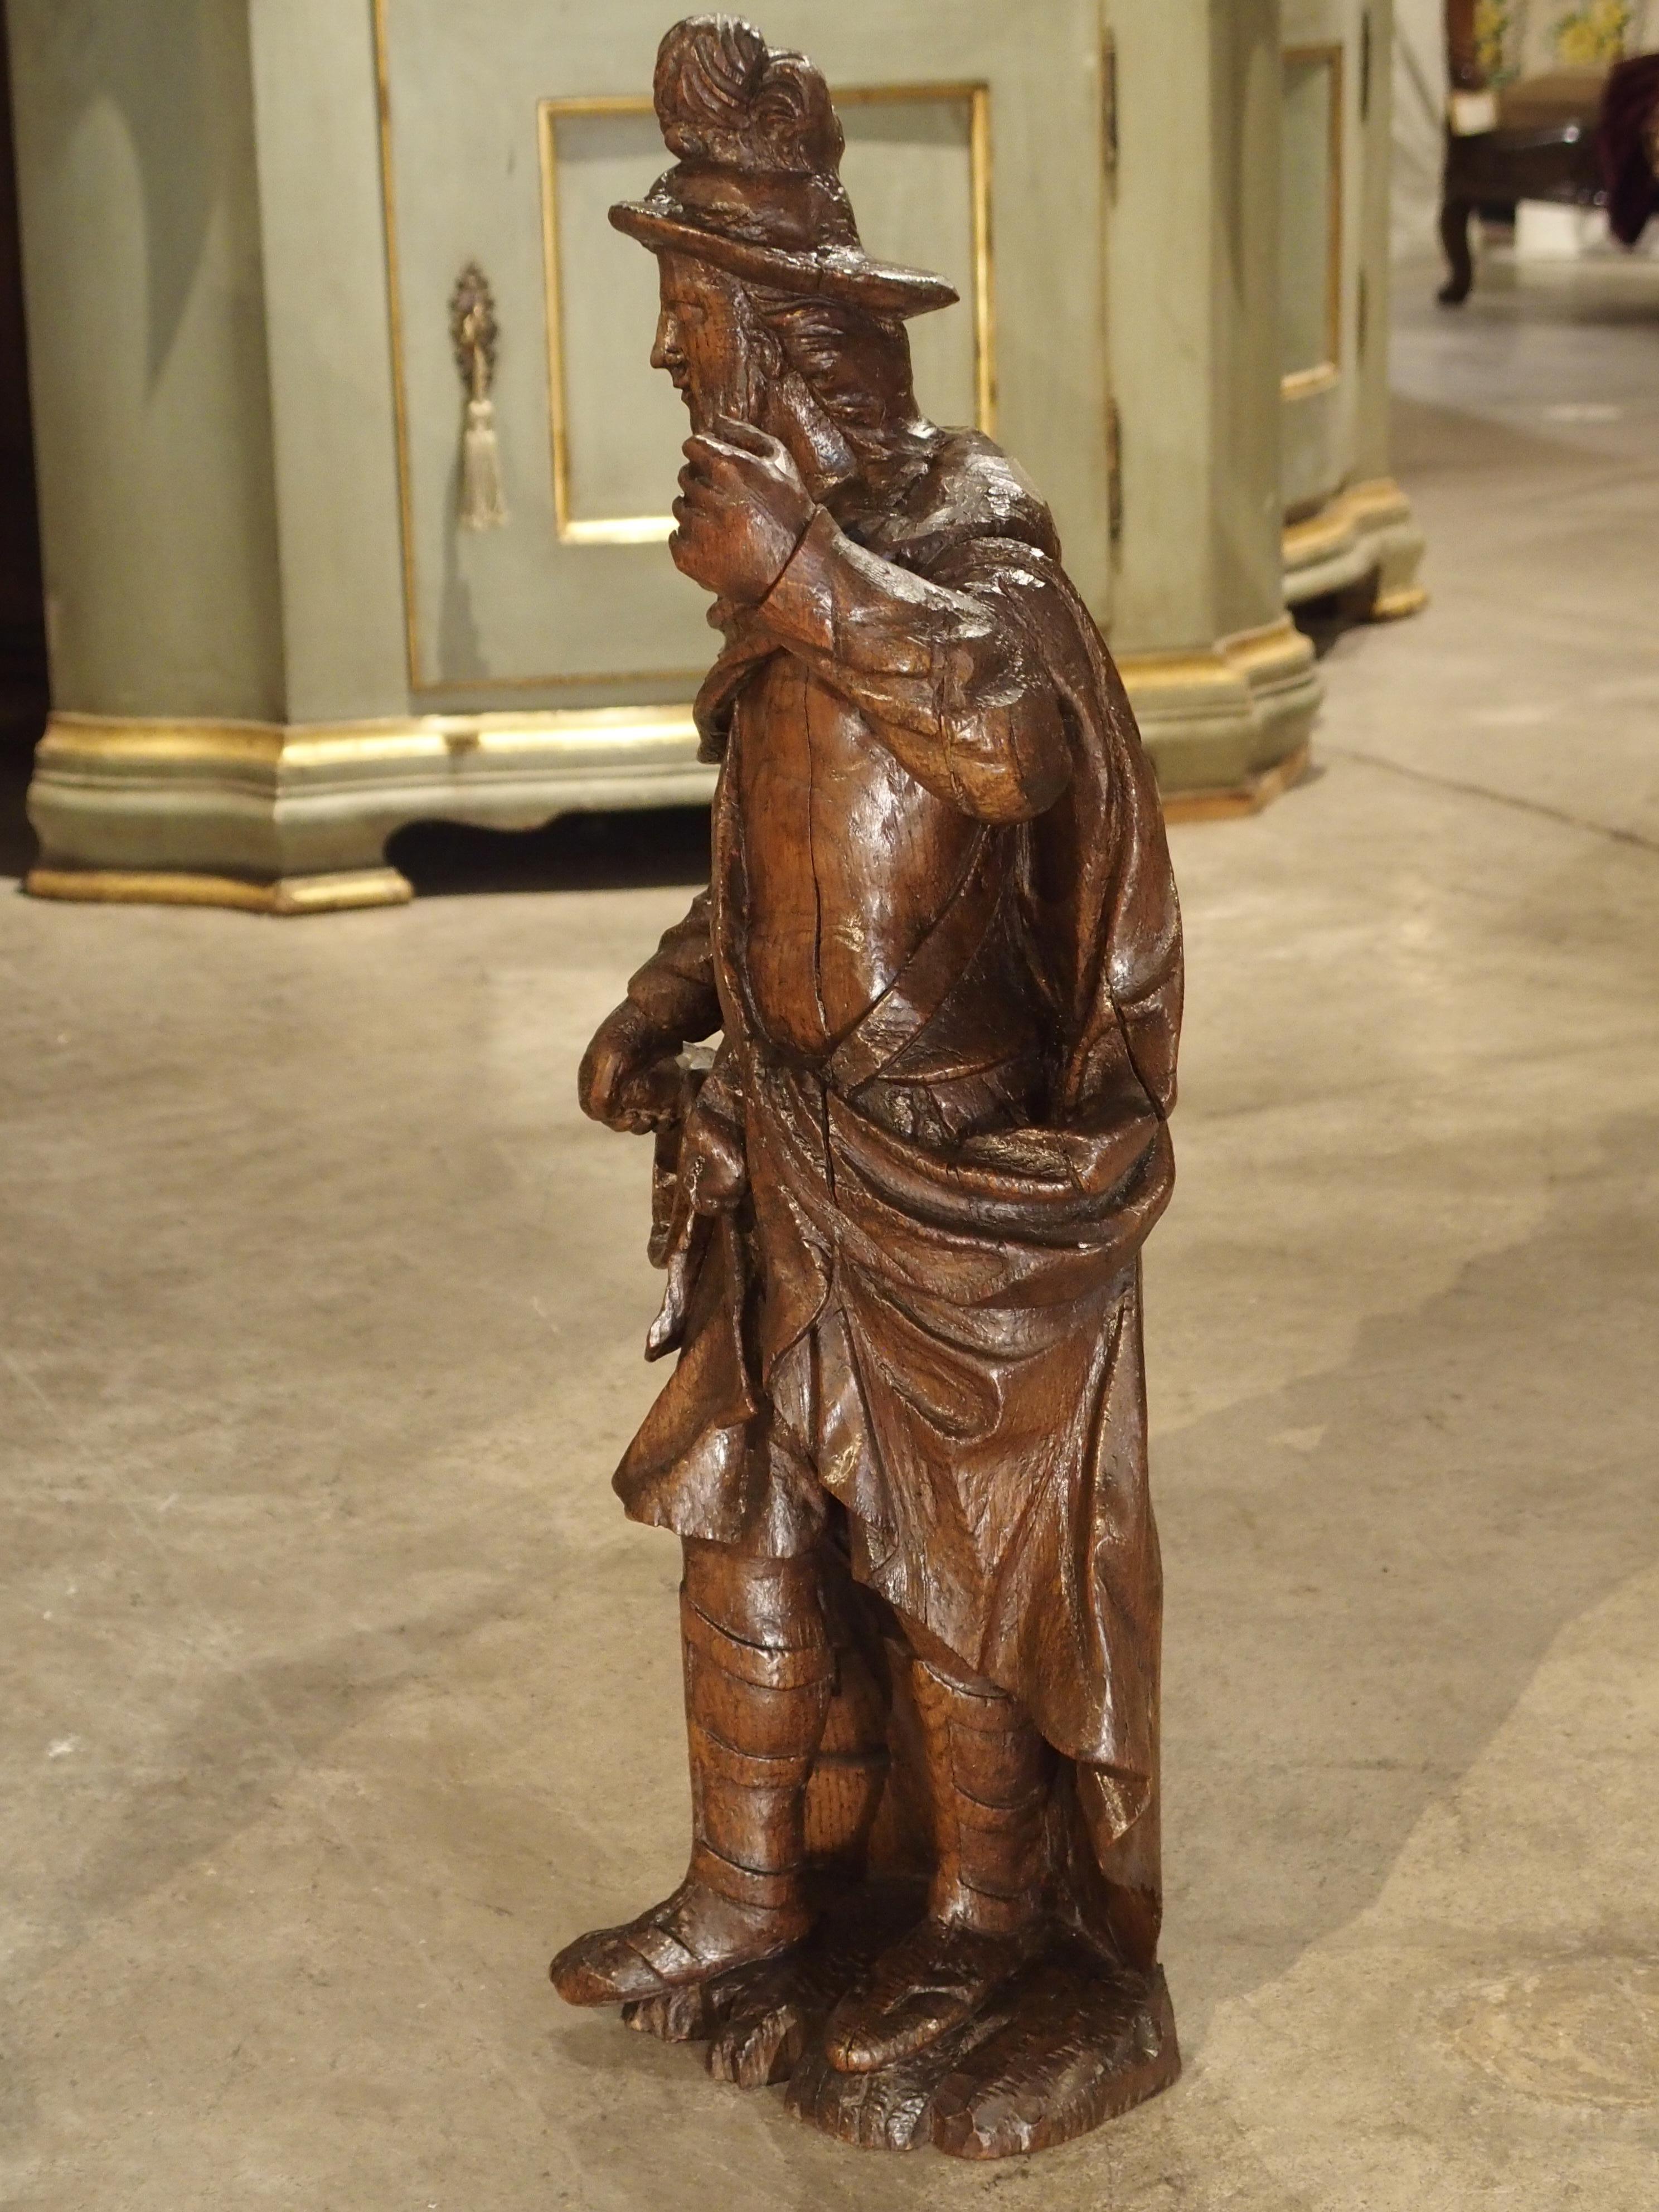 Hand-Carved Wonderful 17th Century Oak Statue of Saint Florian, Patron Saint of Firefighters For Sale